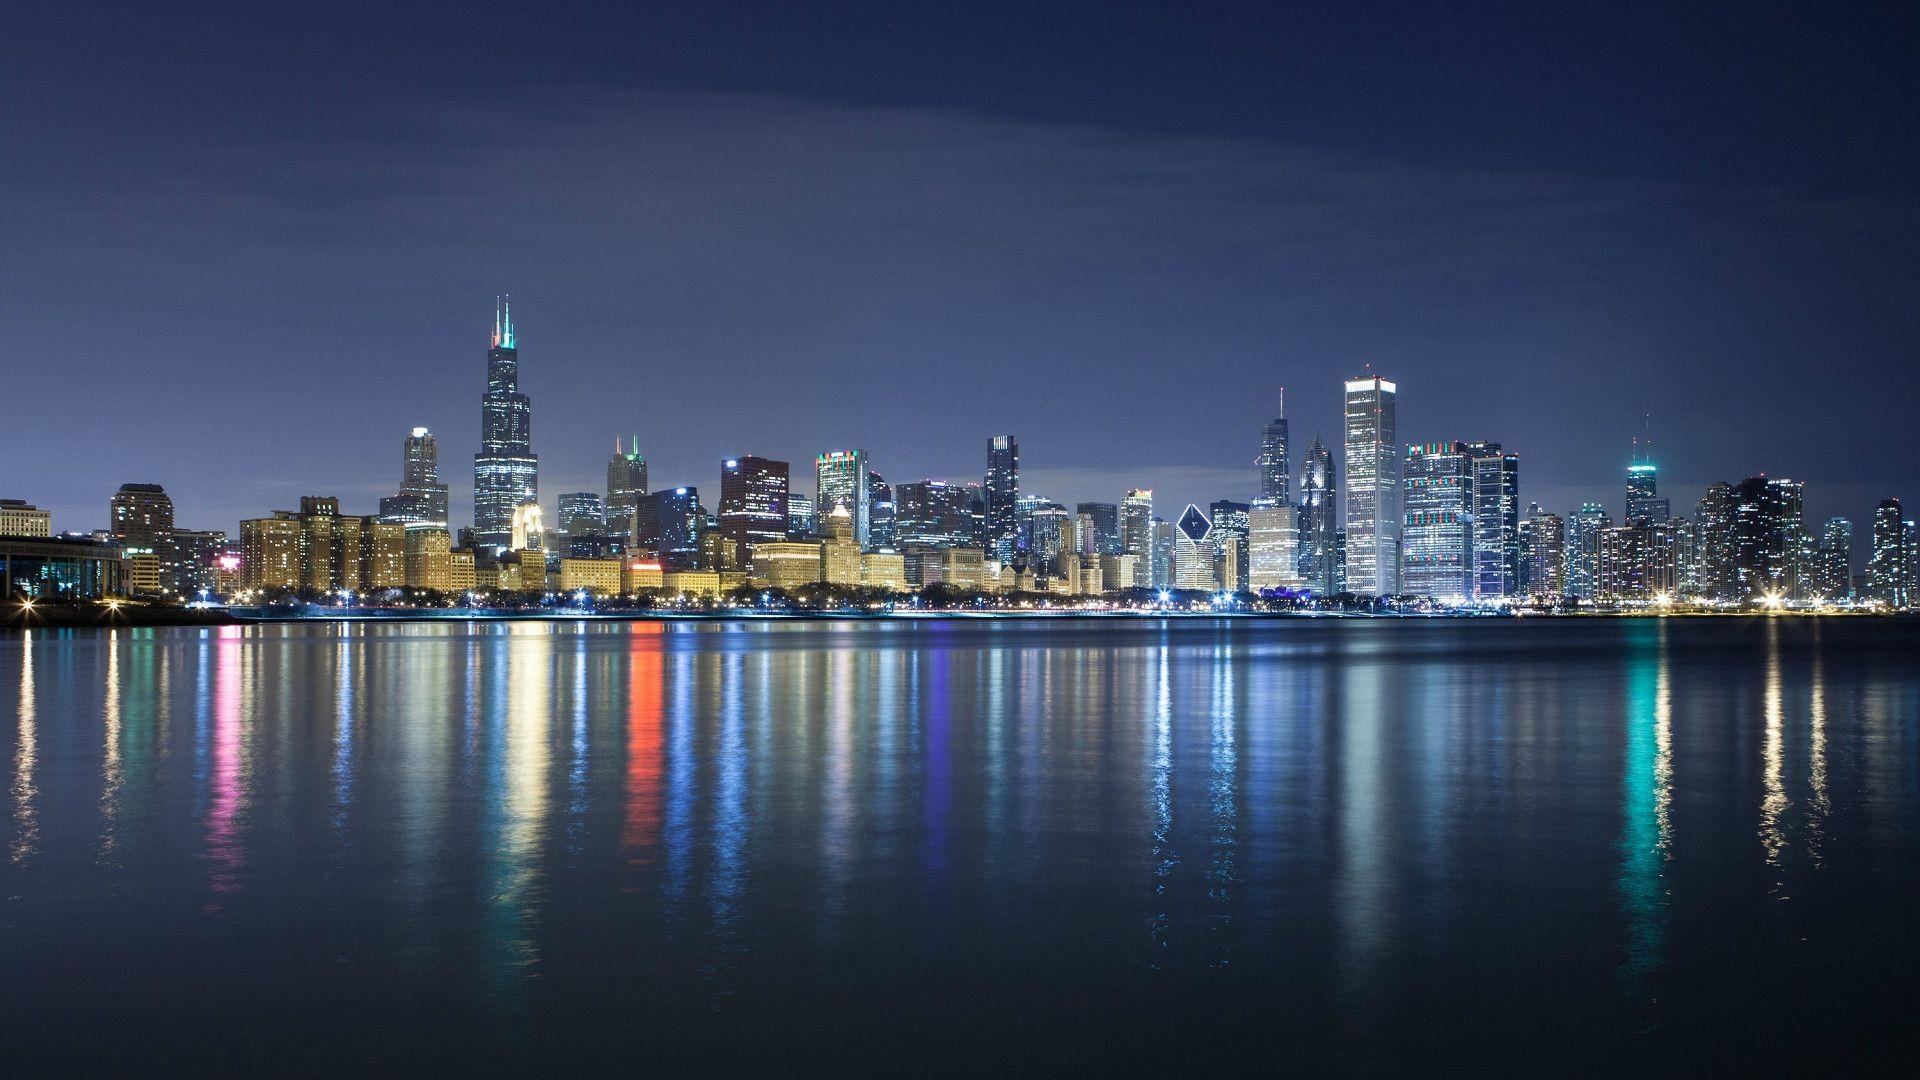 Skyline: The night cityscape of Chicago, A view from Lake Michigan, The state of Illinois. 1920x1080 Full HD Wallpaper.